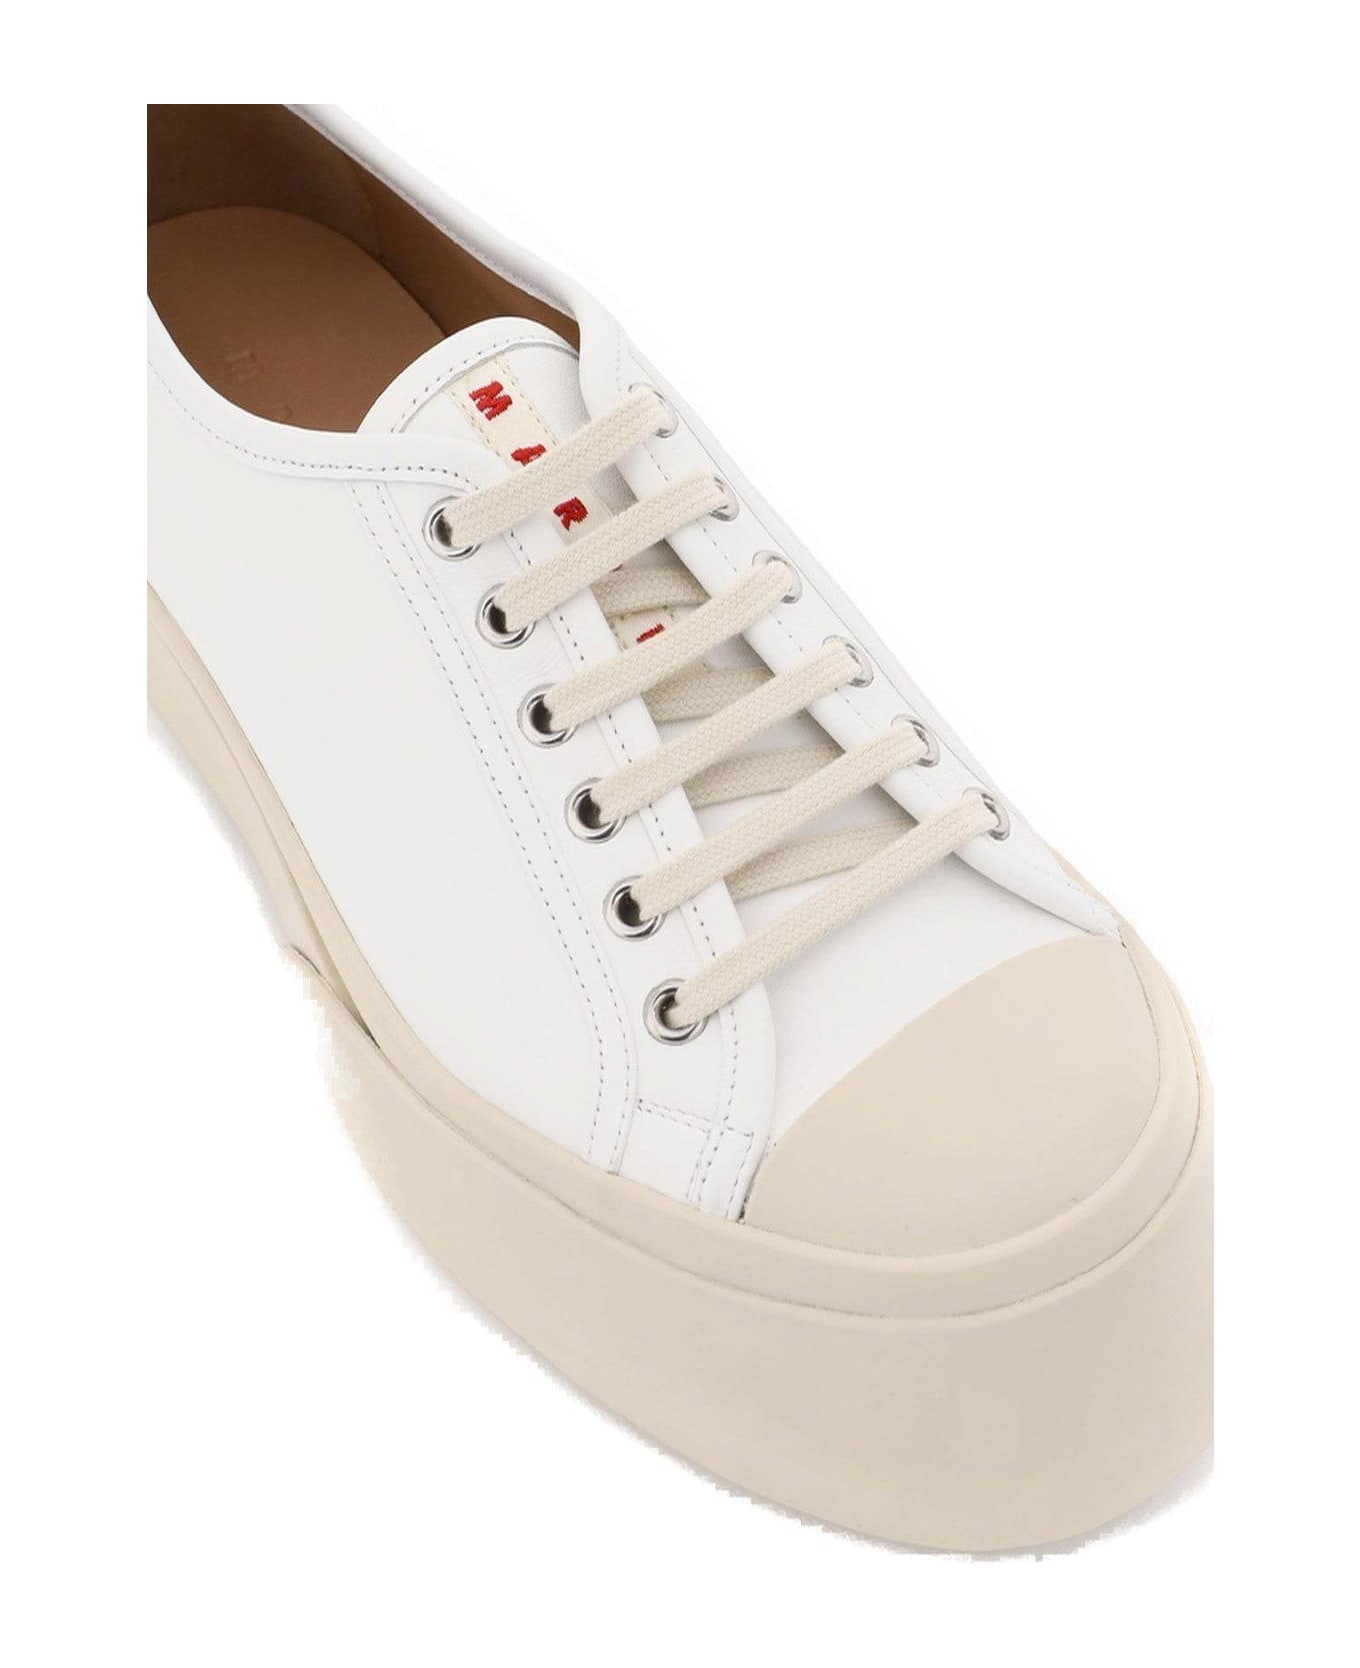 Marni Pablo Chunky Sole Sneakers - WHITE スニーカー